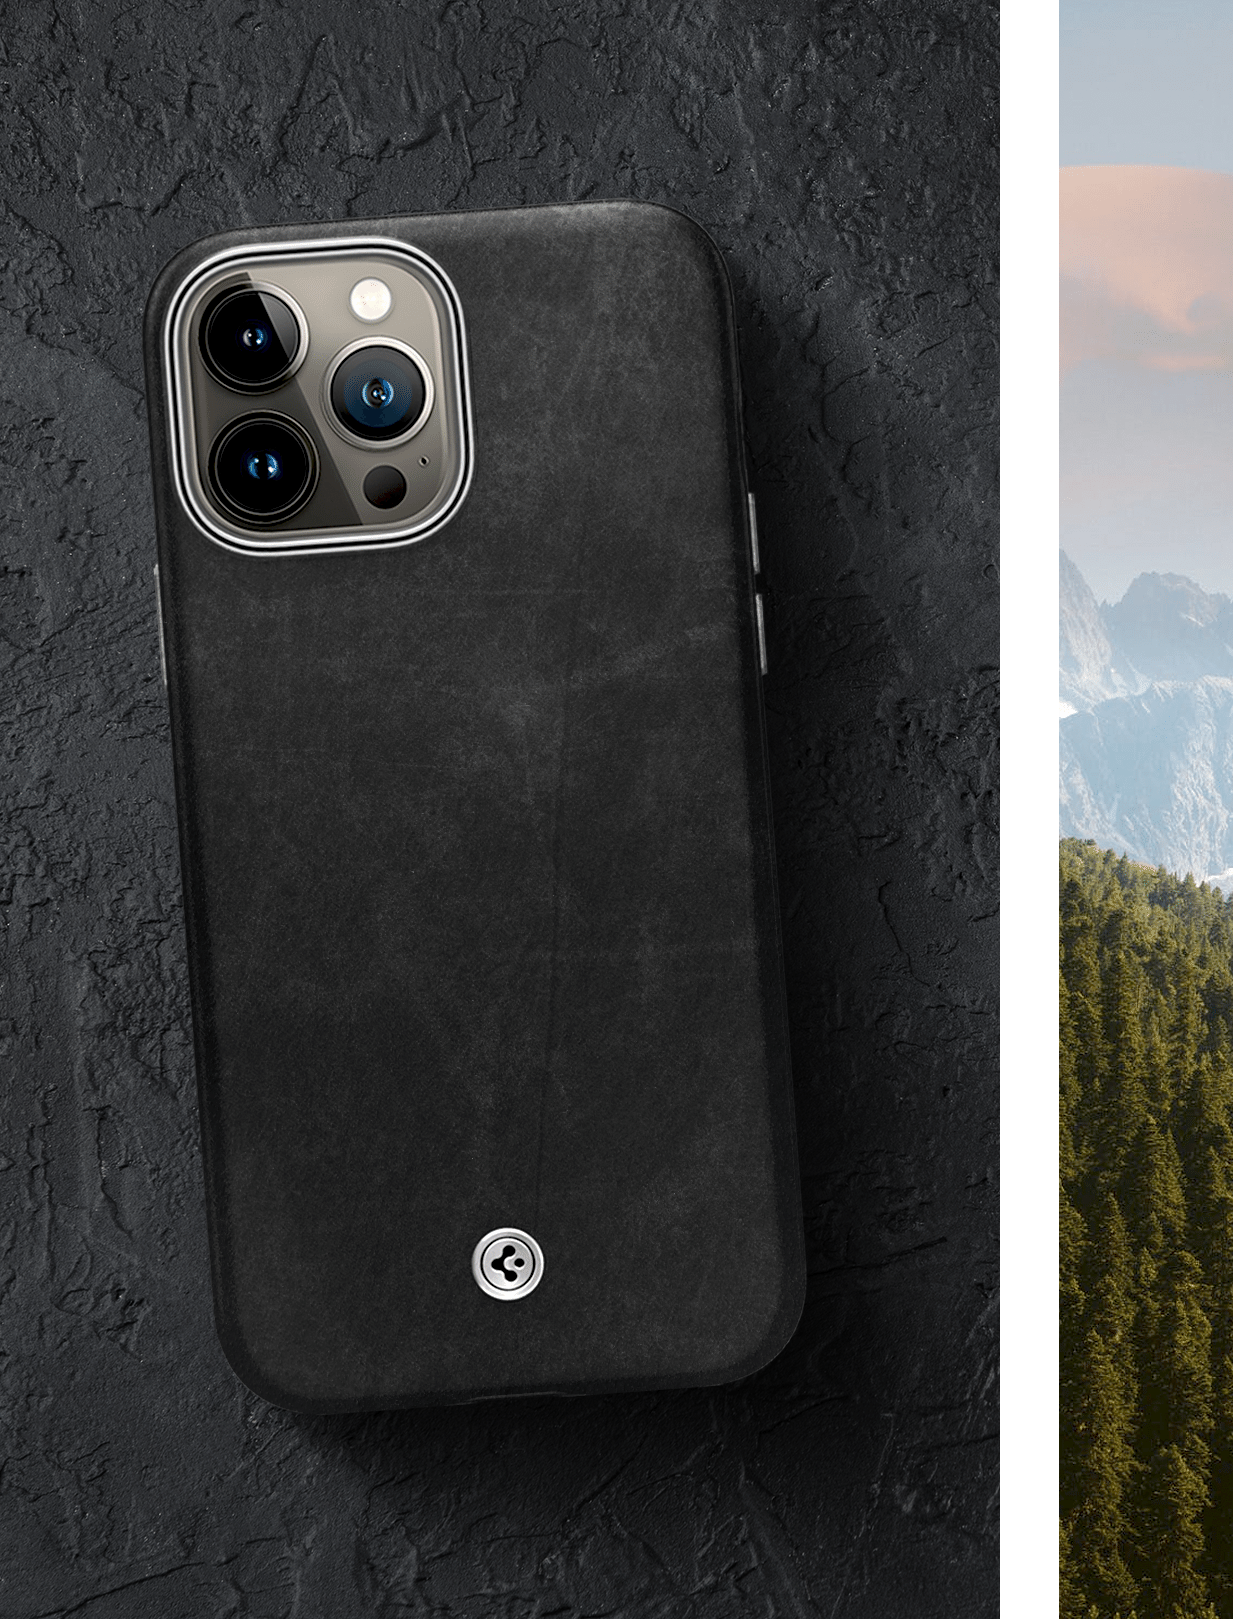 Spigen Enzo leather case review: Luxury iPhone 13 protection at a price